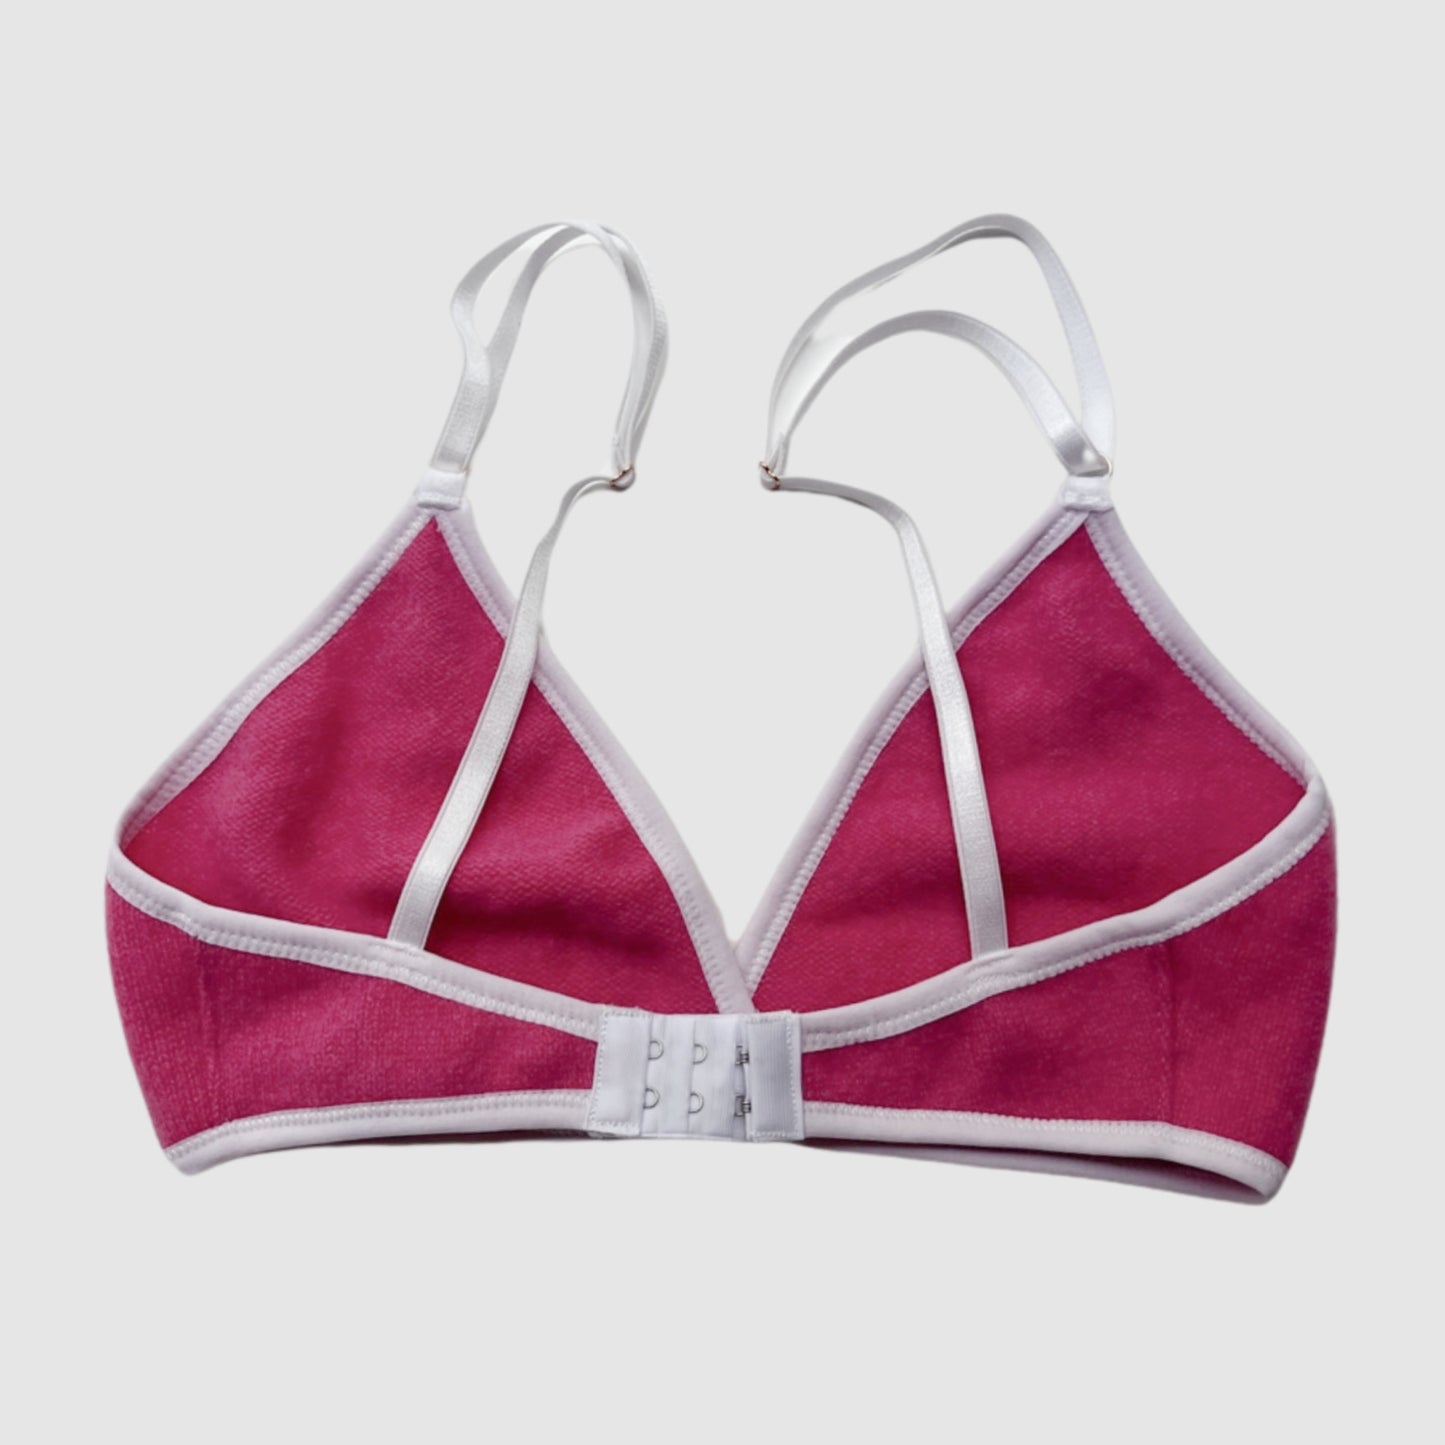 shop best 100% cashmere bra in Pink. Ready-to-ship